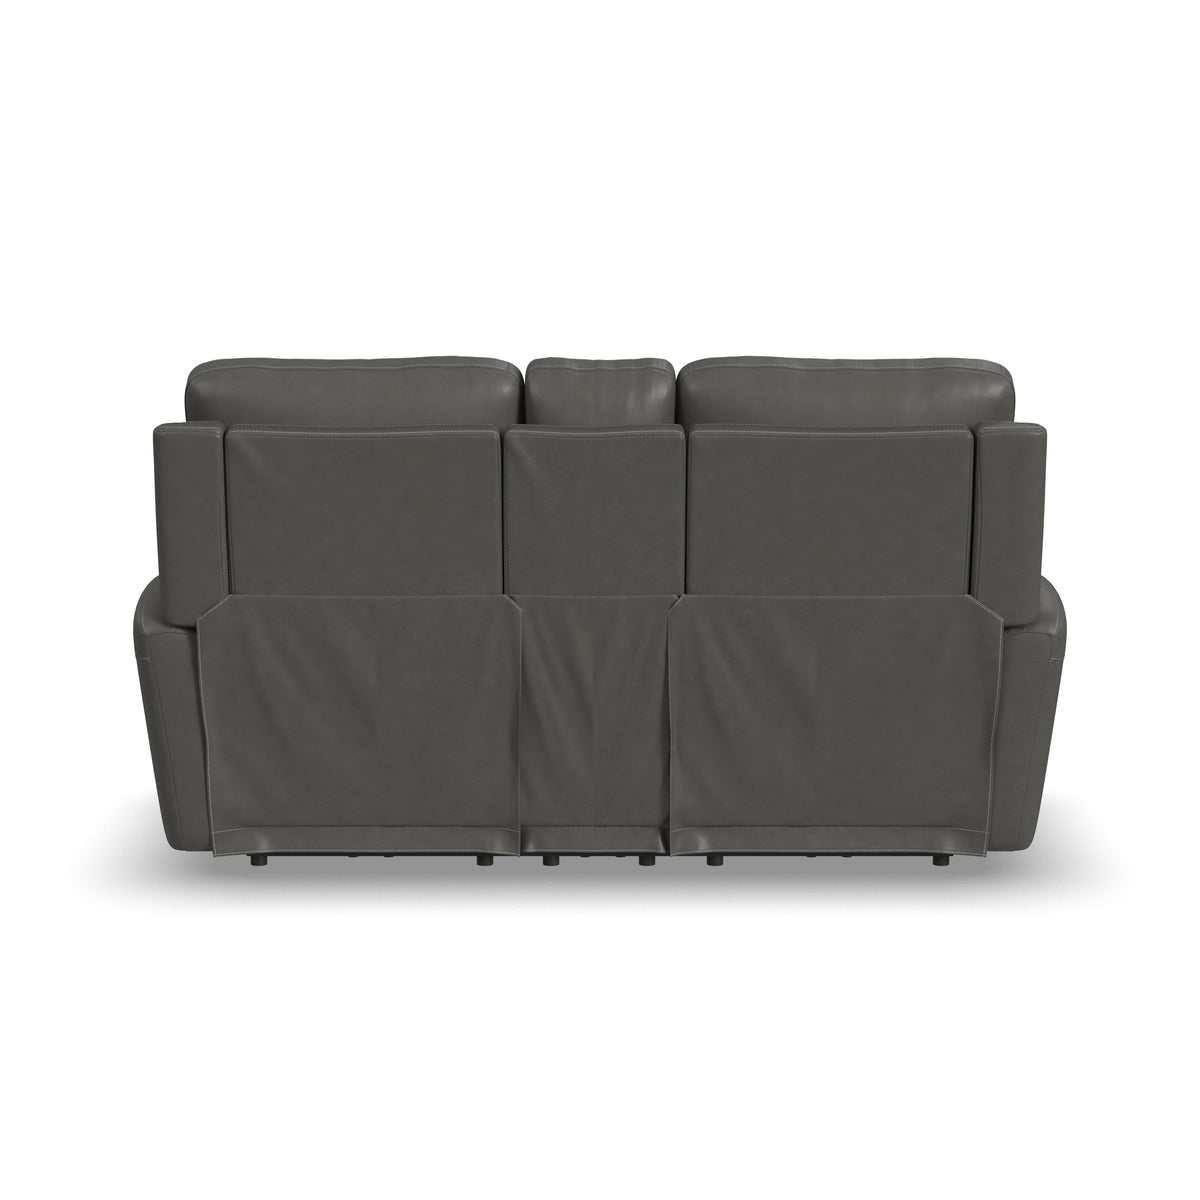 Power Reclining Loveseat with Console & Power Headrests & Lumbar